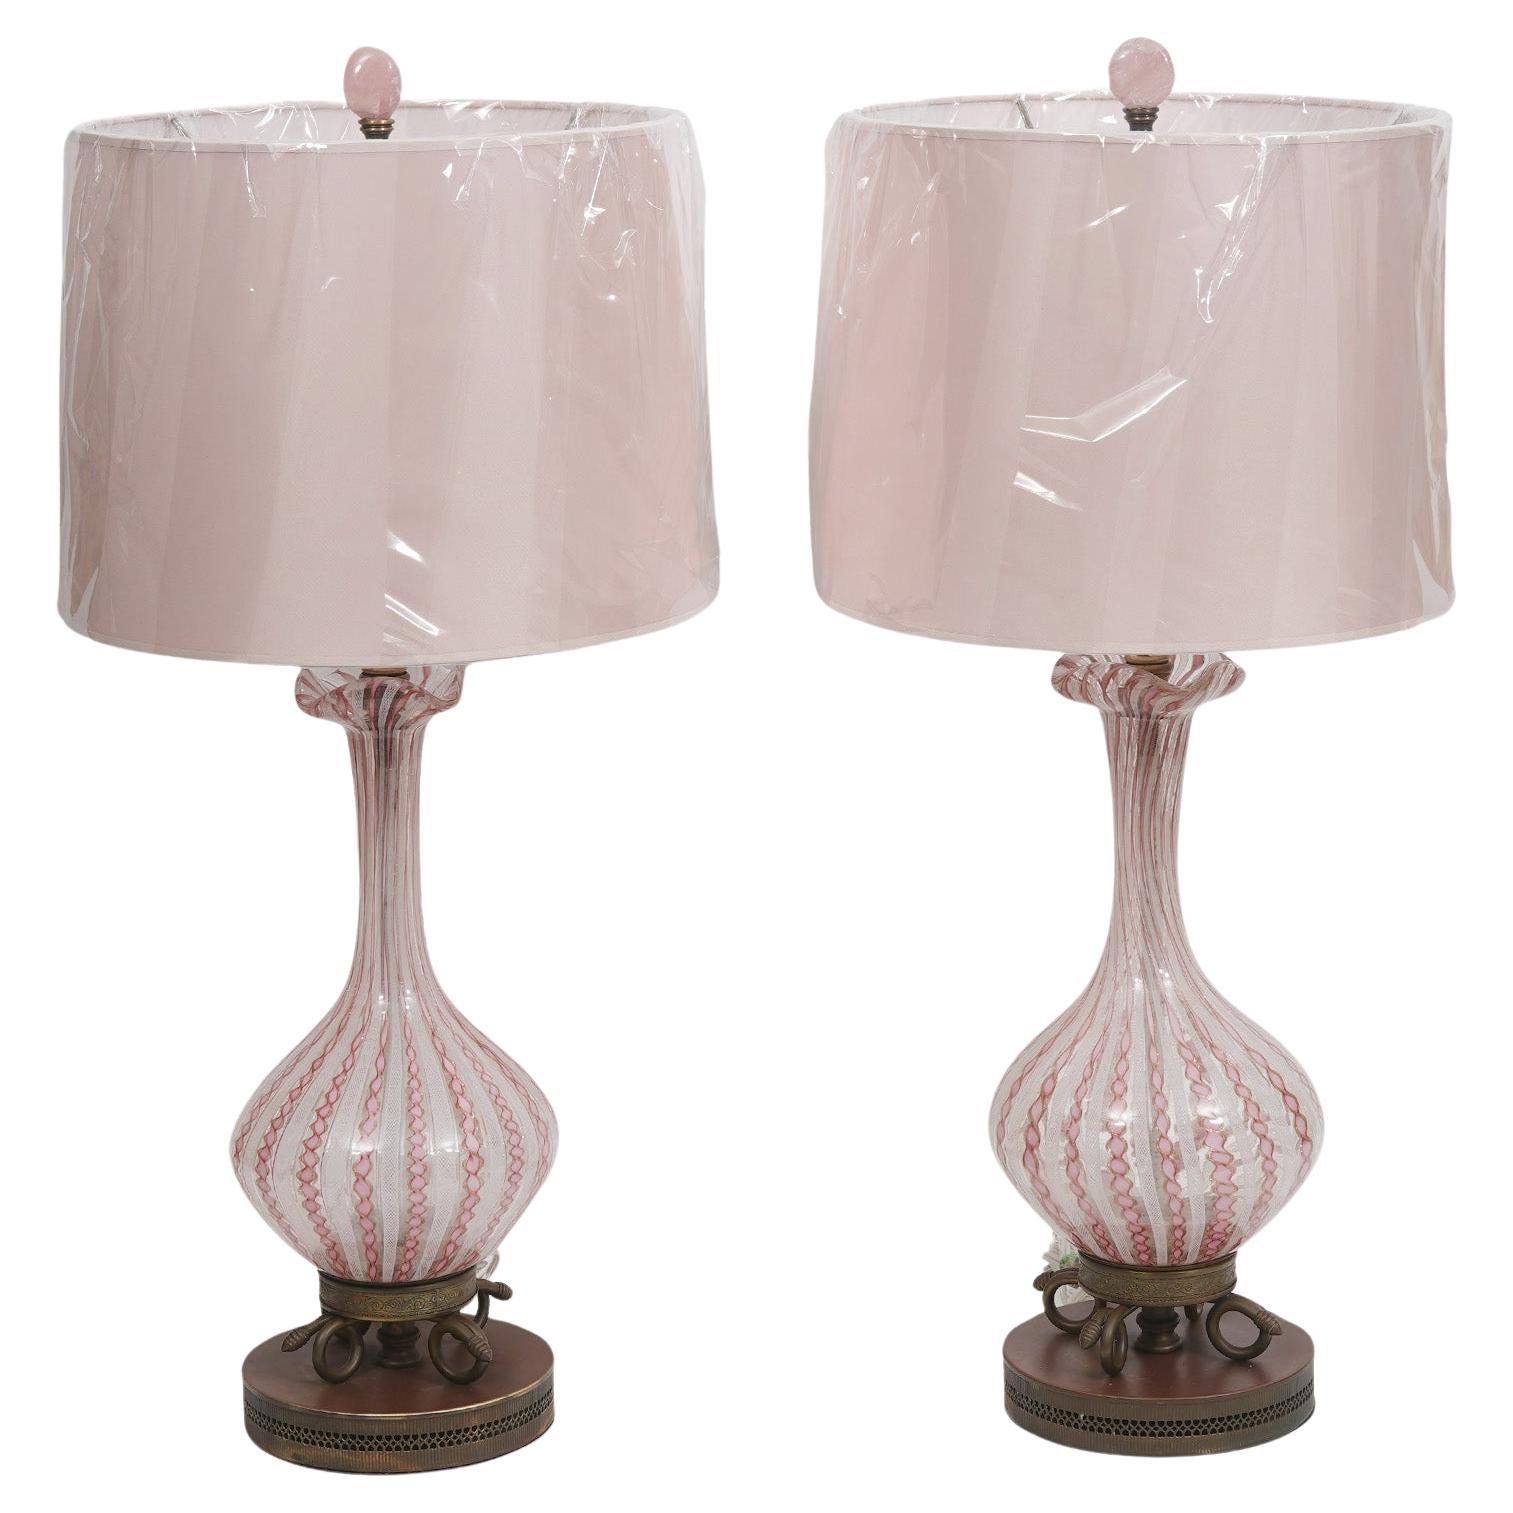 Pair of Vintage Italian Glass Lamps